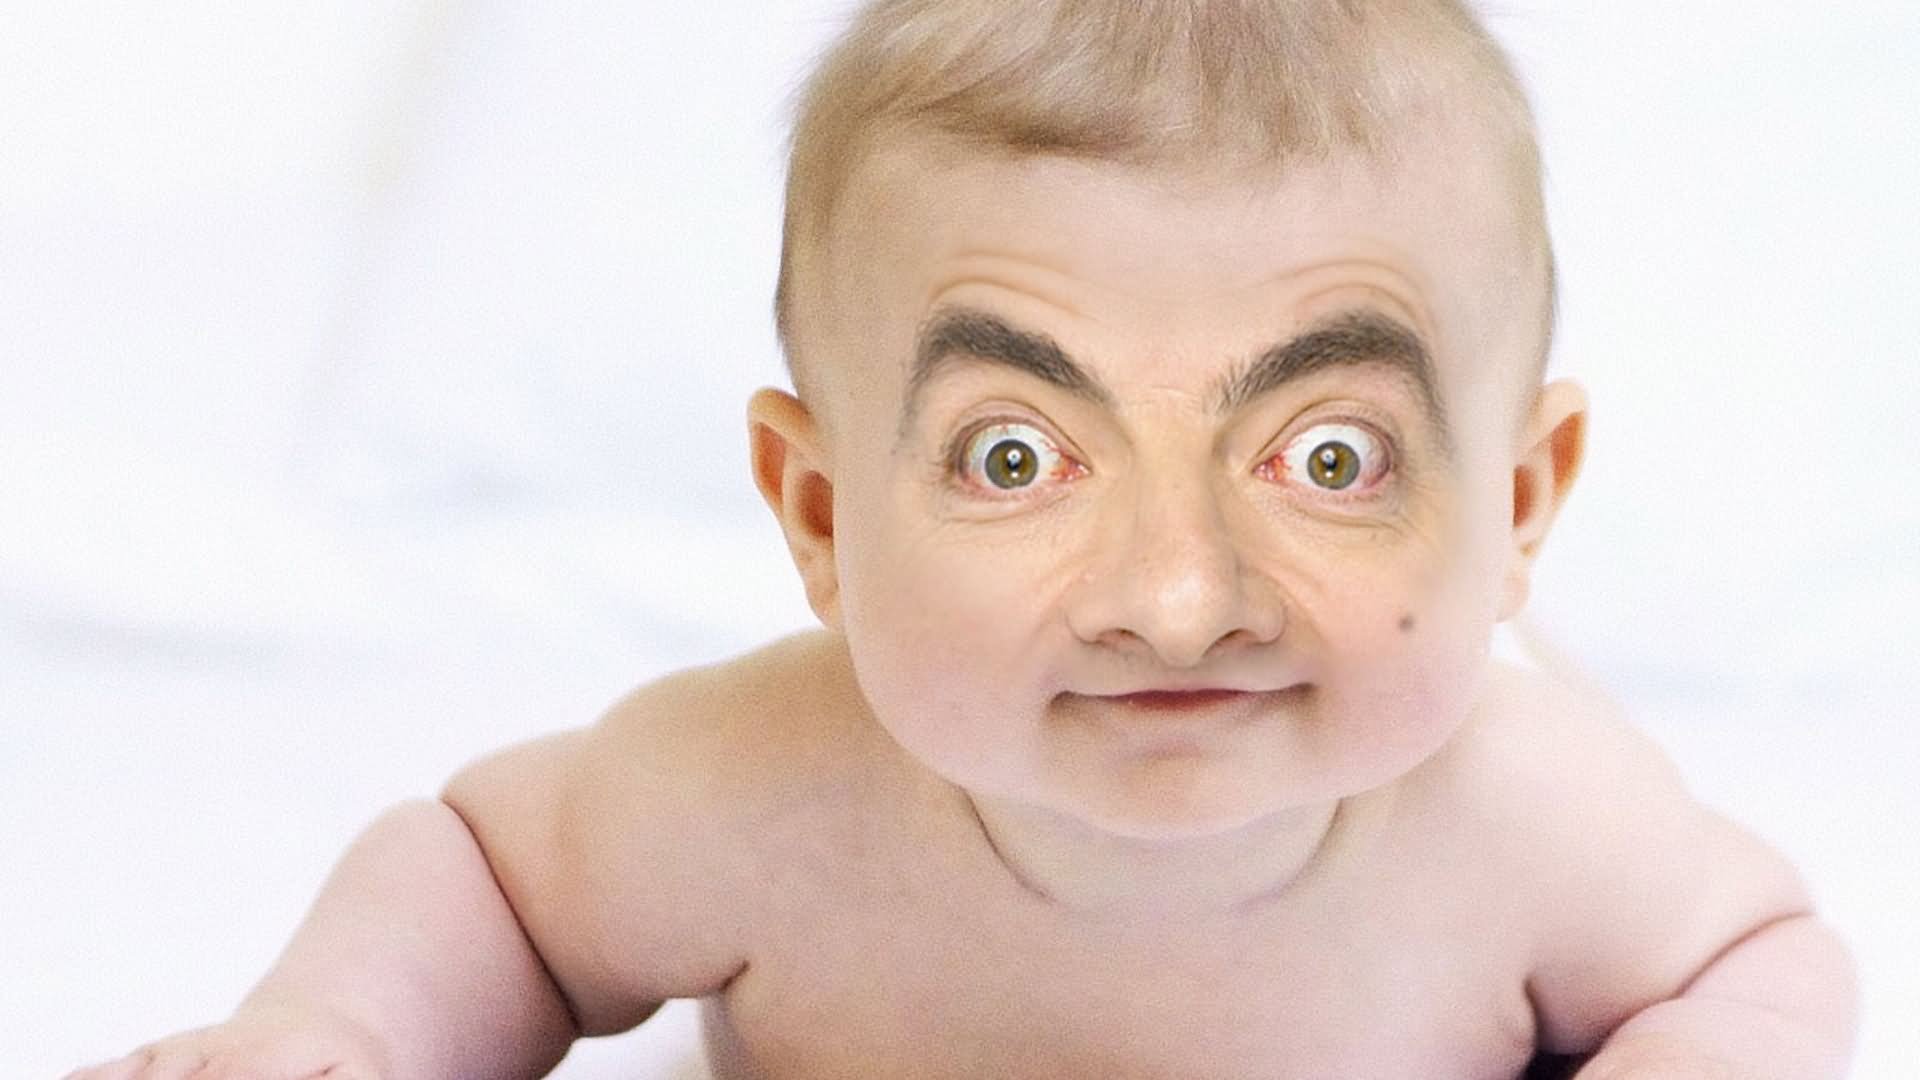 20 Best Funny Baby Pictures